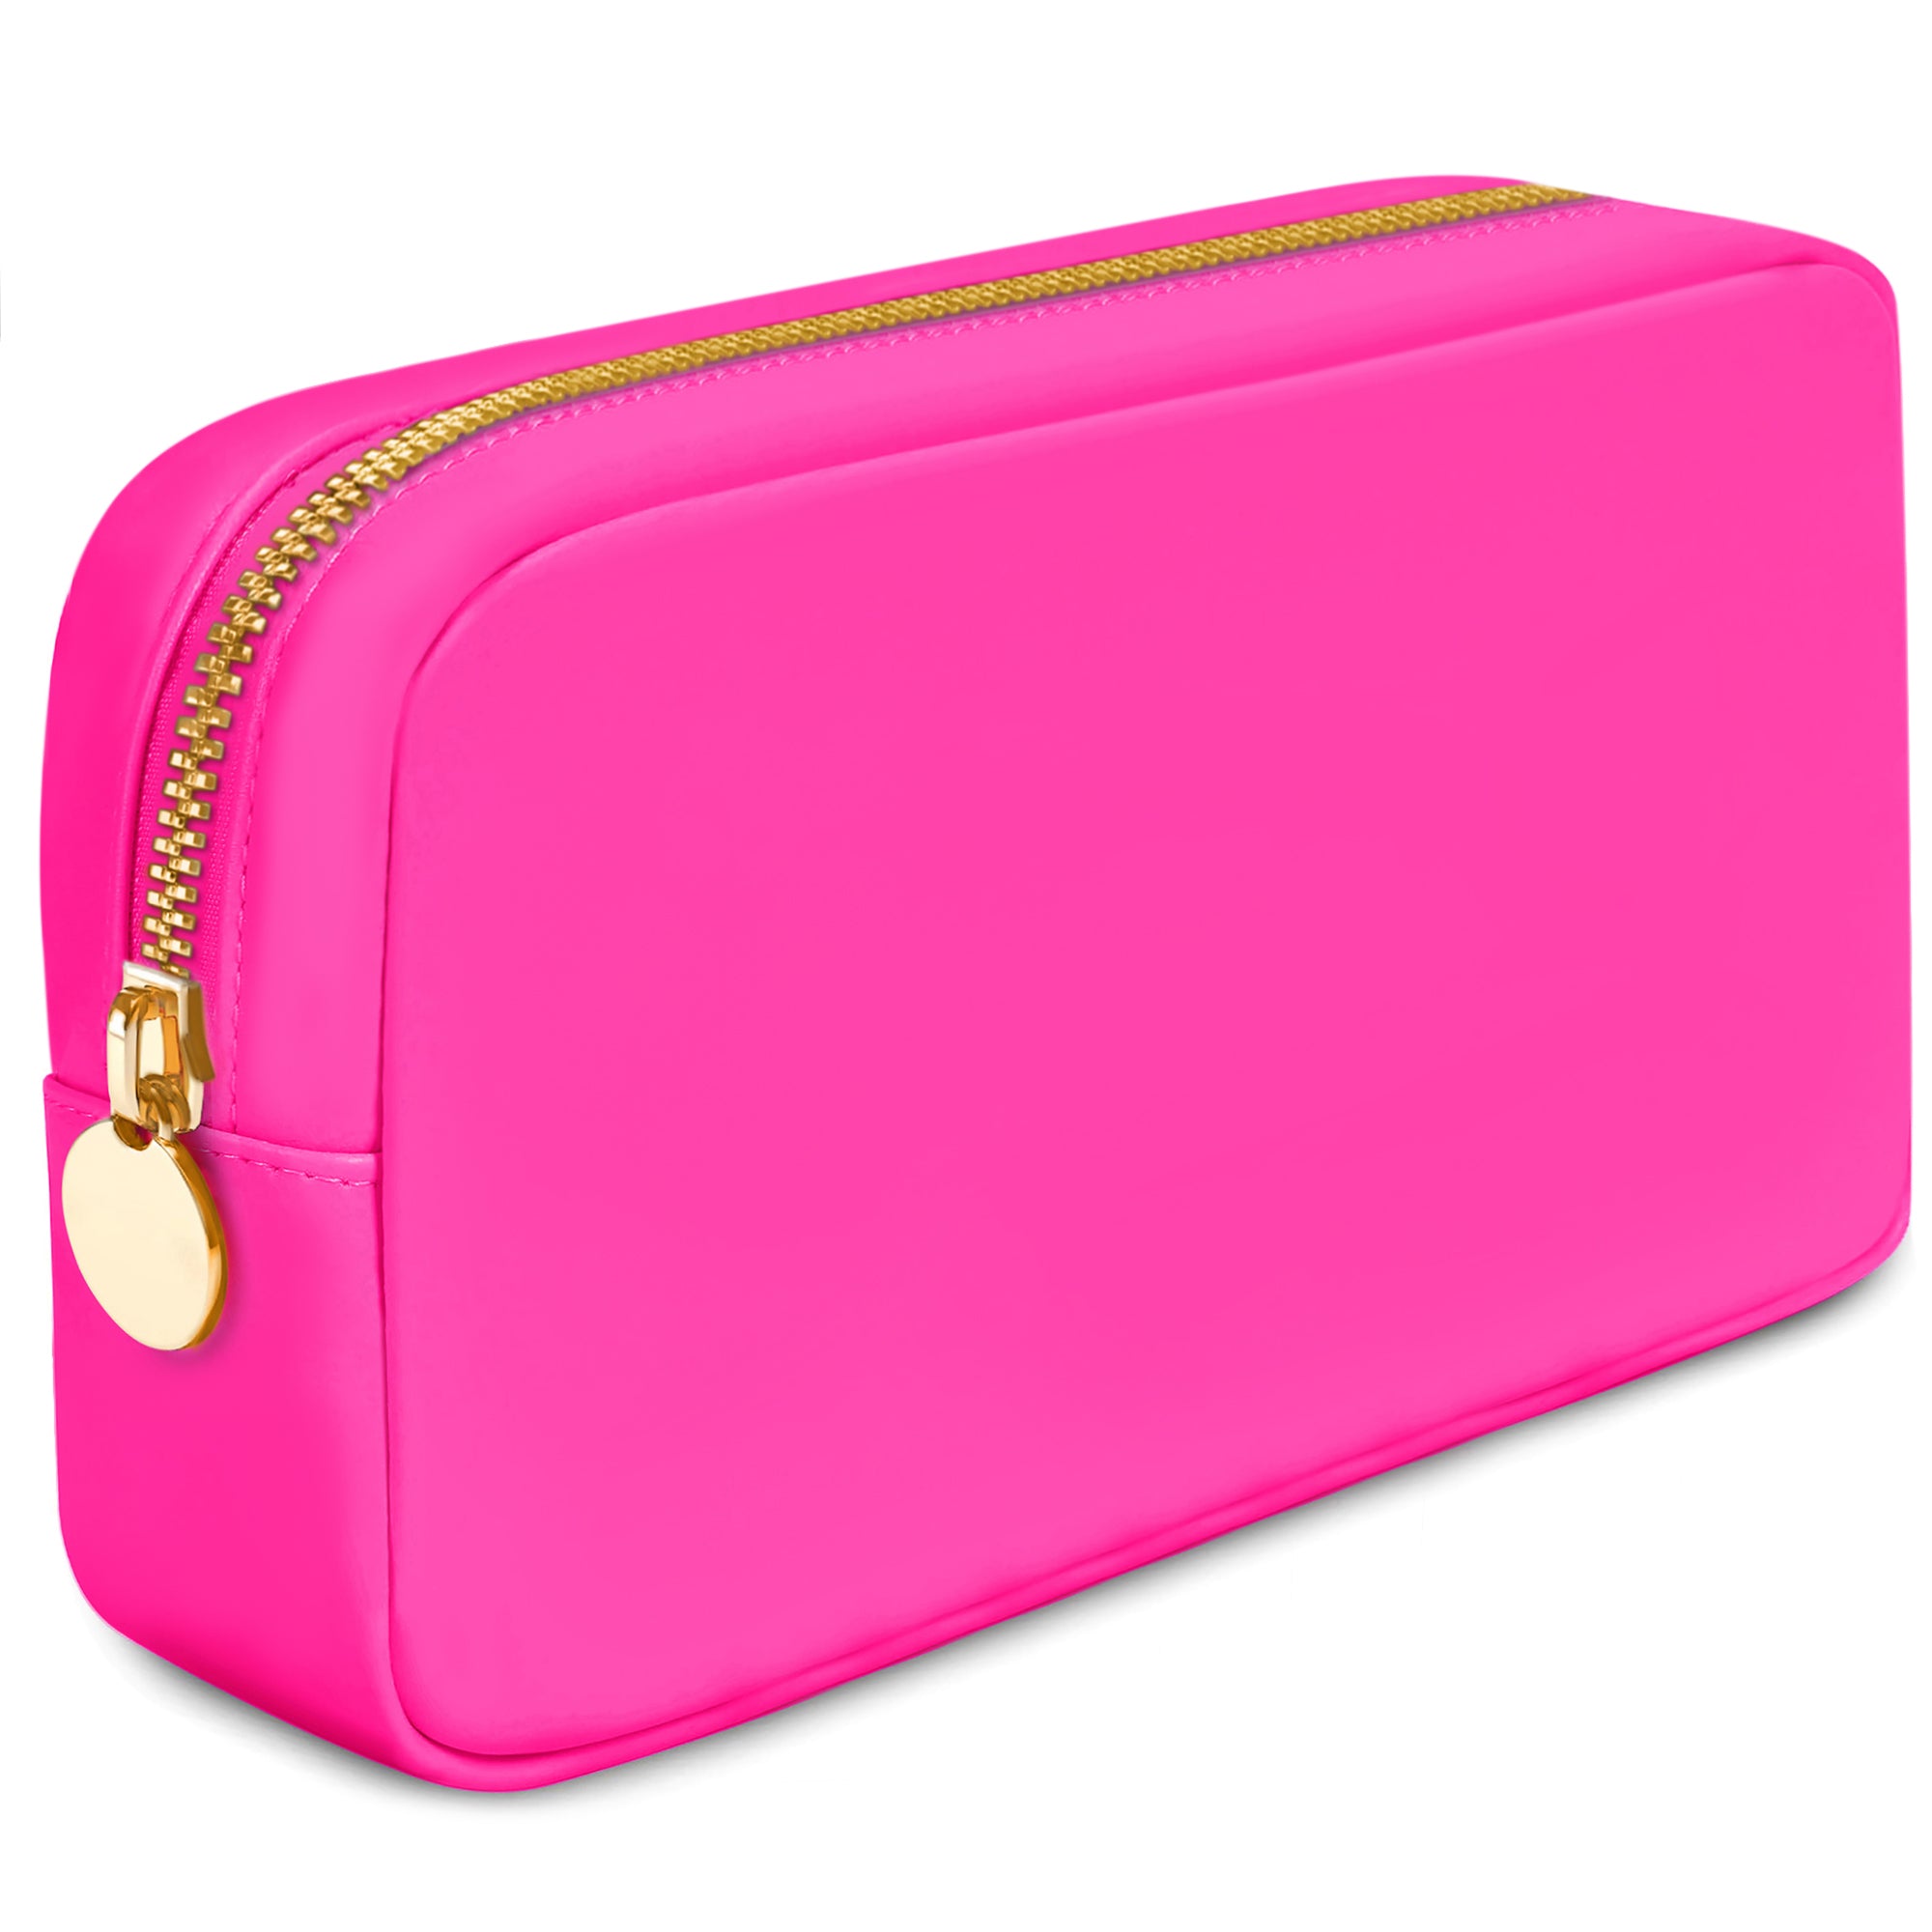 small toiletry bags for women toiletry bag for women small women toiletry bag small makeup bag for purse compact makeup bag car makeup bag make bag travel pouch for women cute travel toiletry bag small toiletry bag for women hot pink toiletry bag women small makeup travel bag small hot pink makeup bag for purse small medicine bag for purse hot pink zipper pouch hot pink makeup pouch small purse organizer pouch small make up pouch for purse makeup bag travel small school makeup bag purse pouch organizer